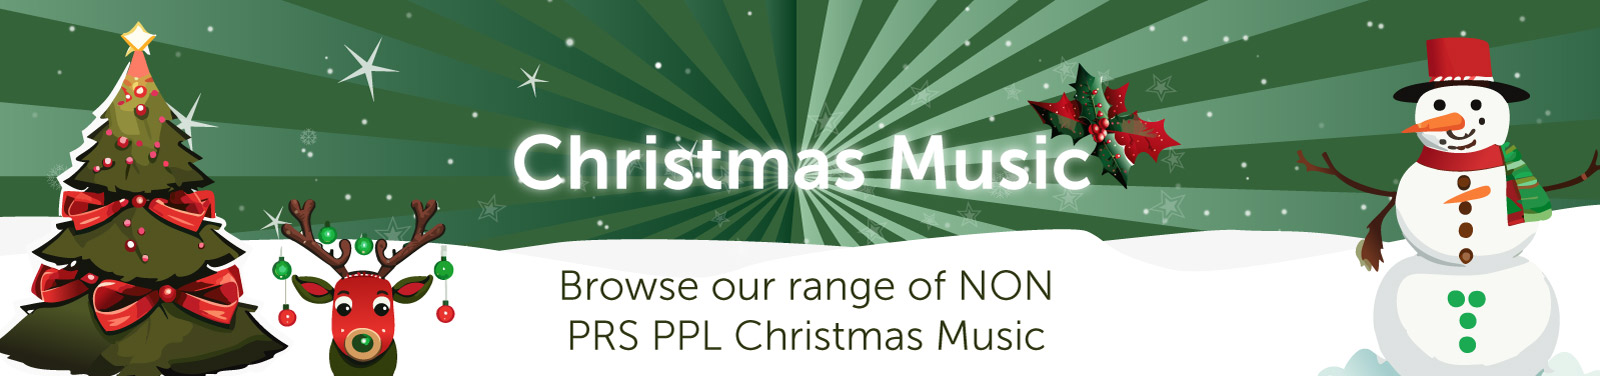 Christmas Music. Browse our range of NON PRS PPL Christmas Music